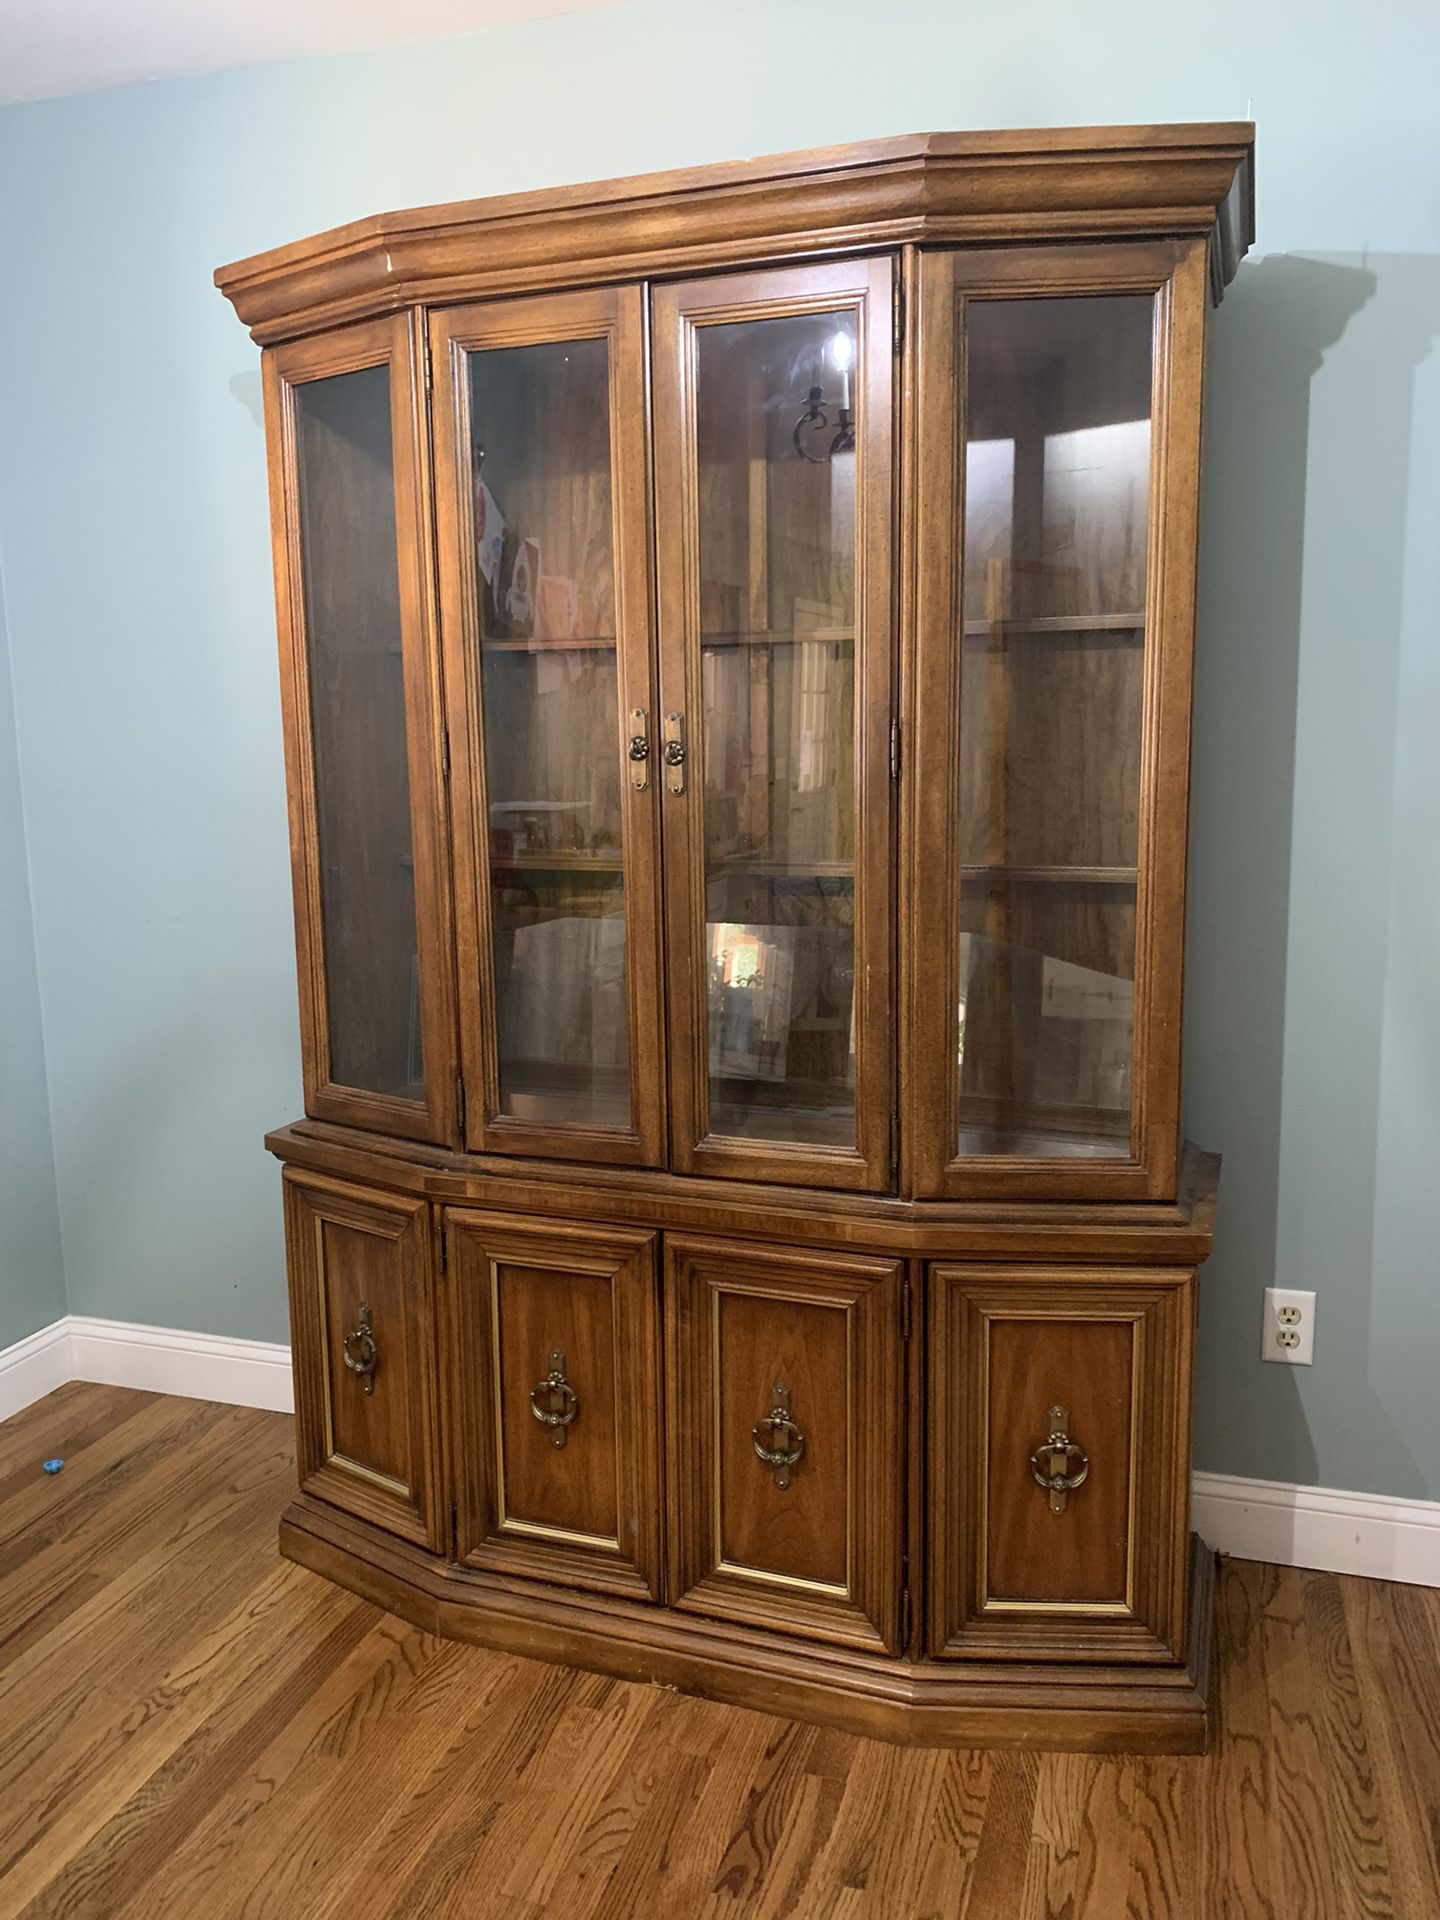 China Cabinet for Sale $50